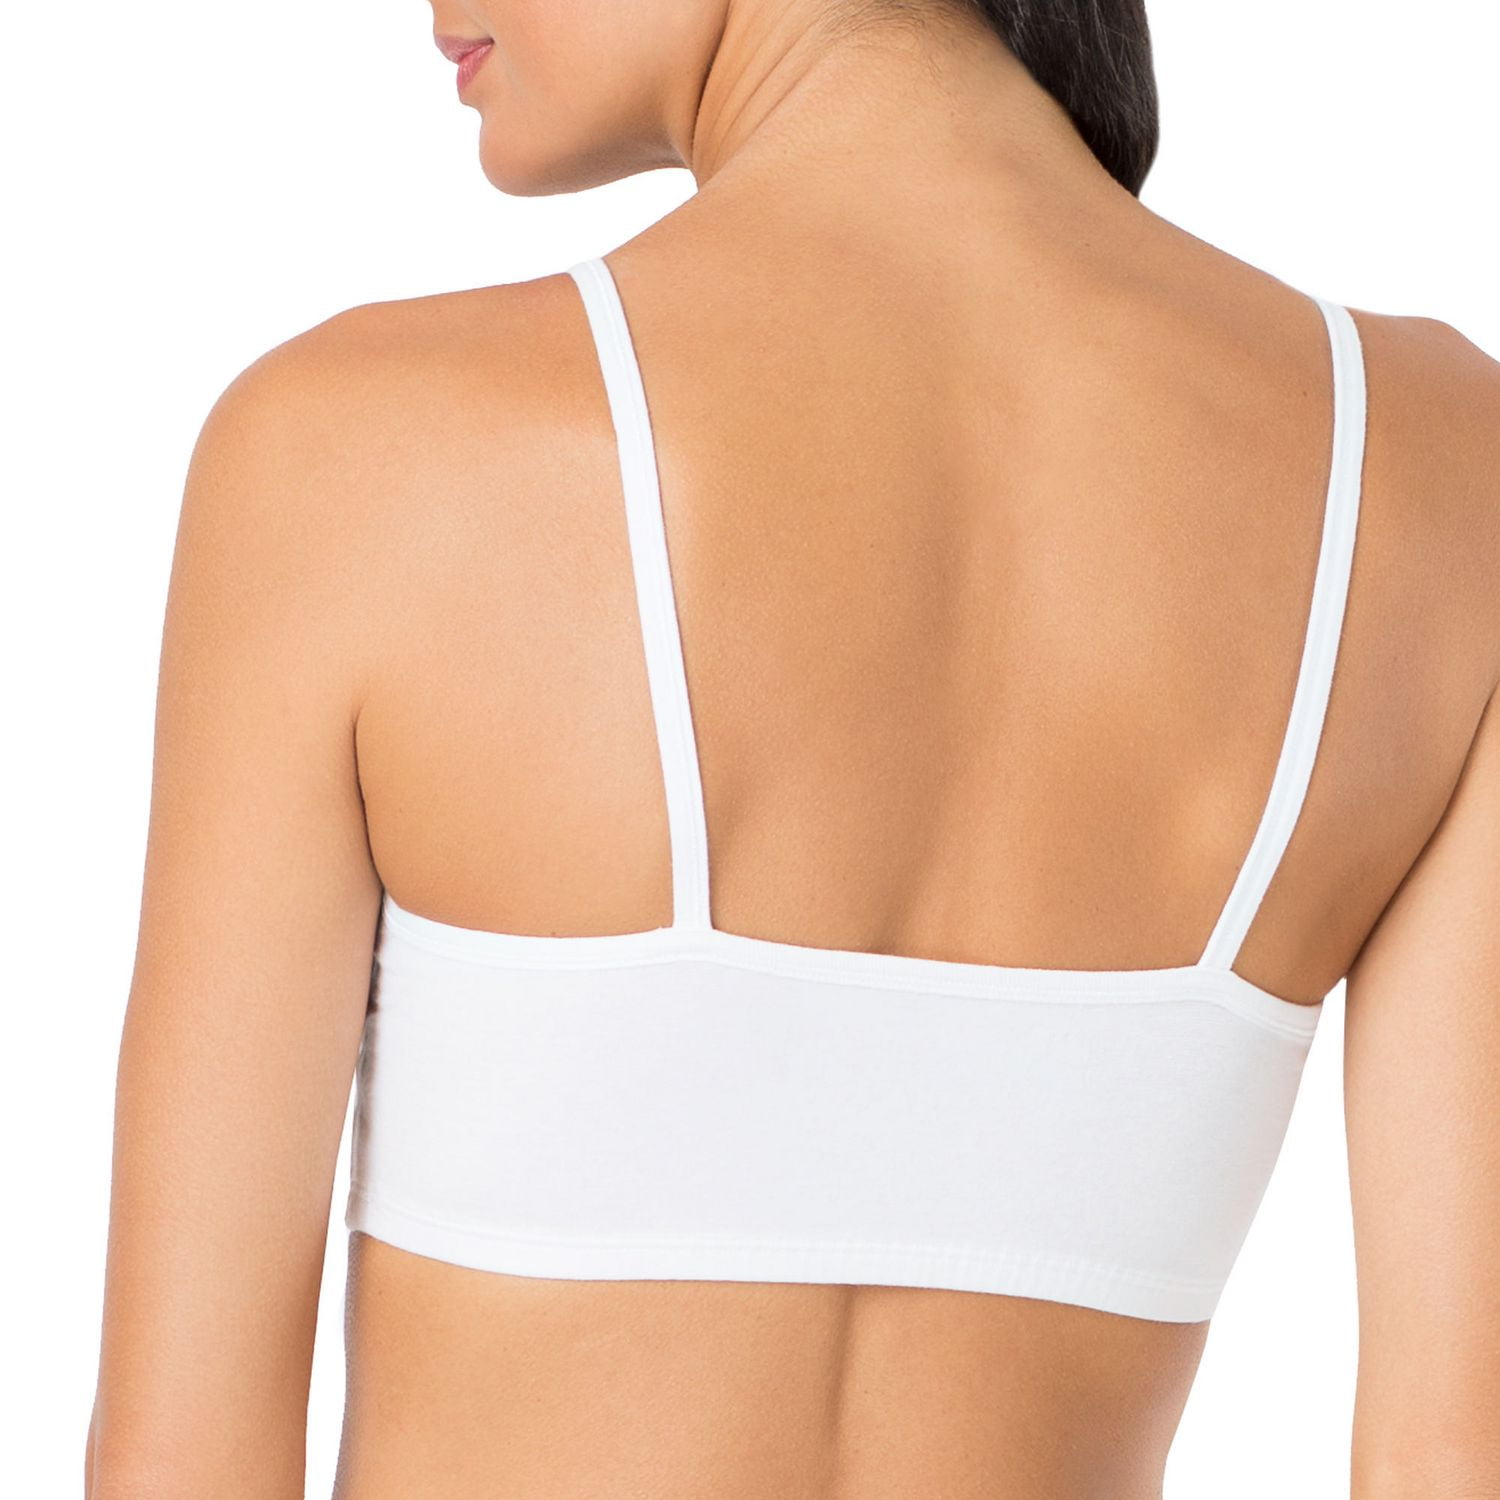 A Bra Fitter is Your Bosom Buddy + Paper Label Trunk Show and